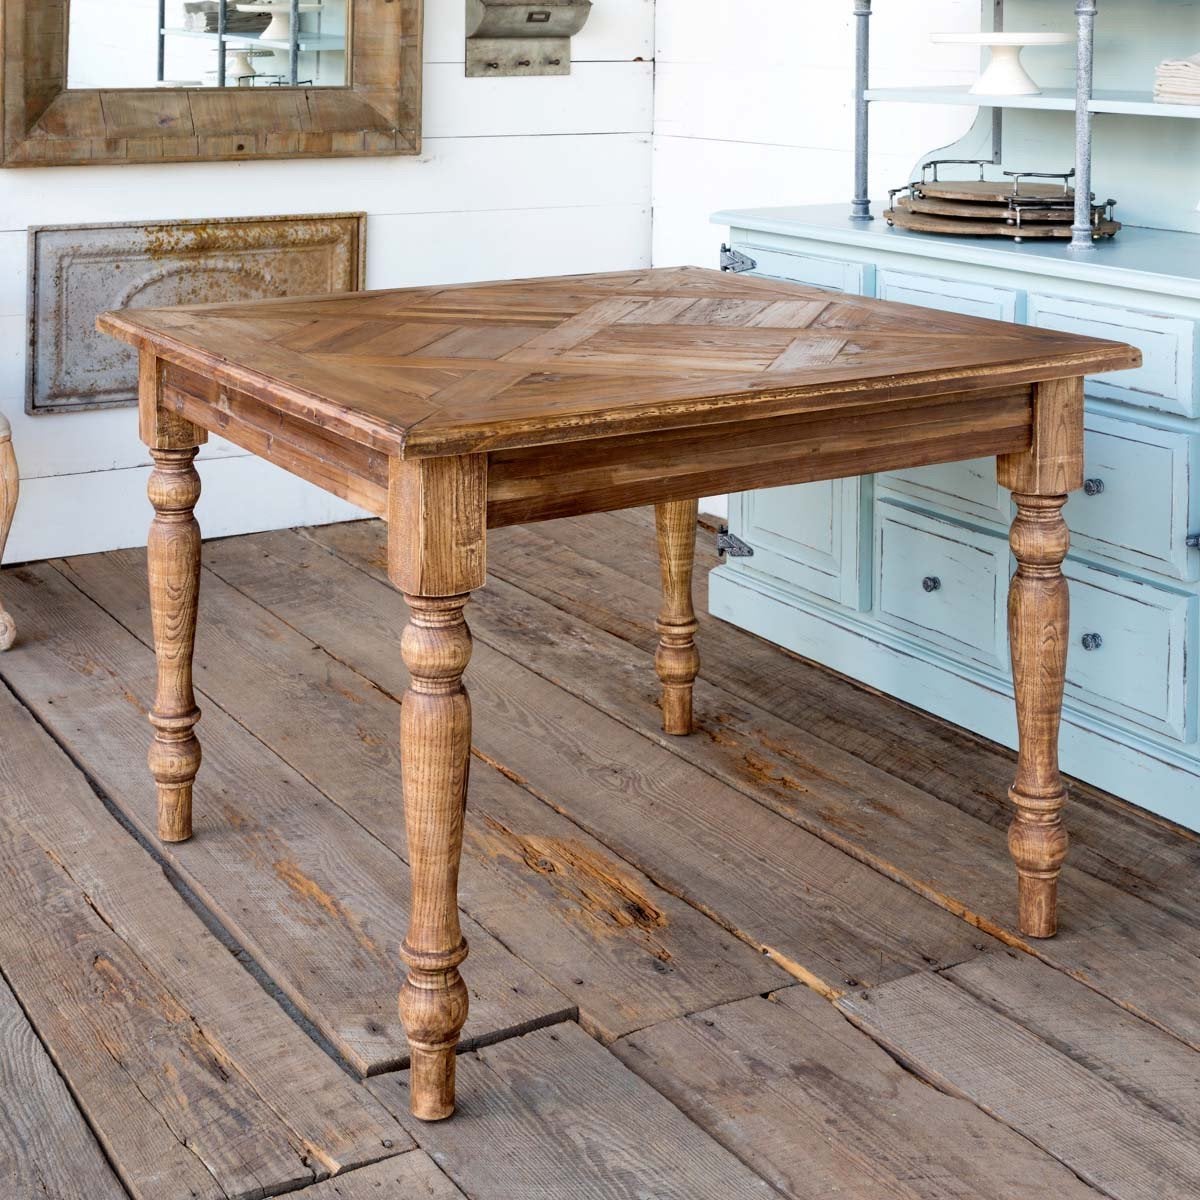 The Best Way To Clean Antique Wood Furniture